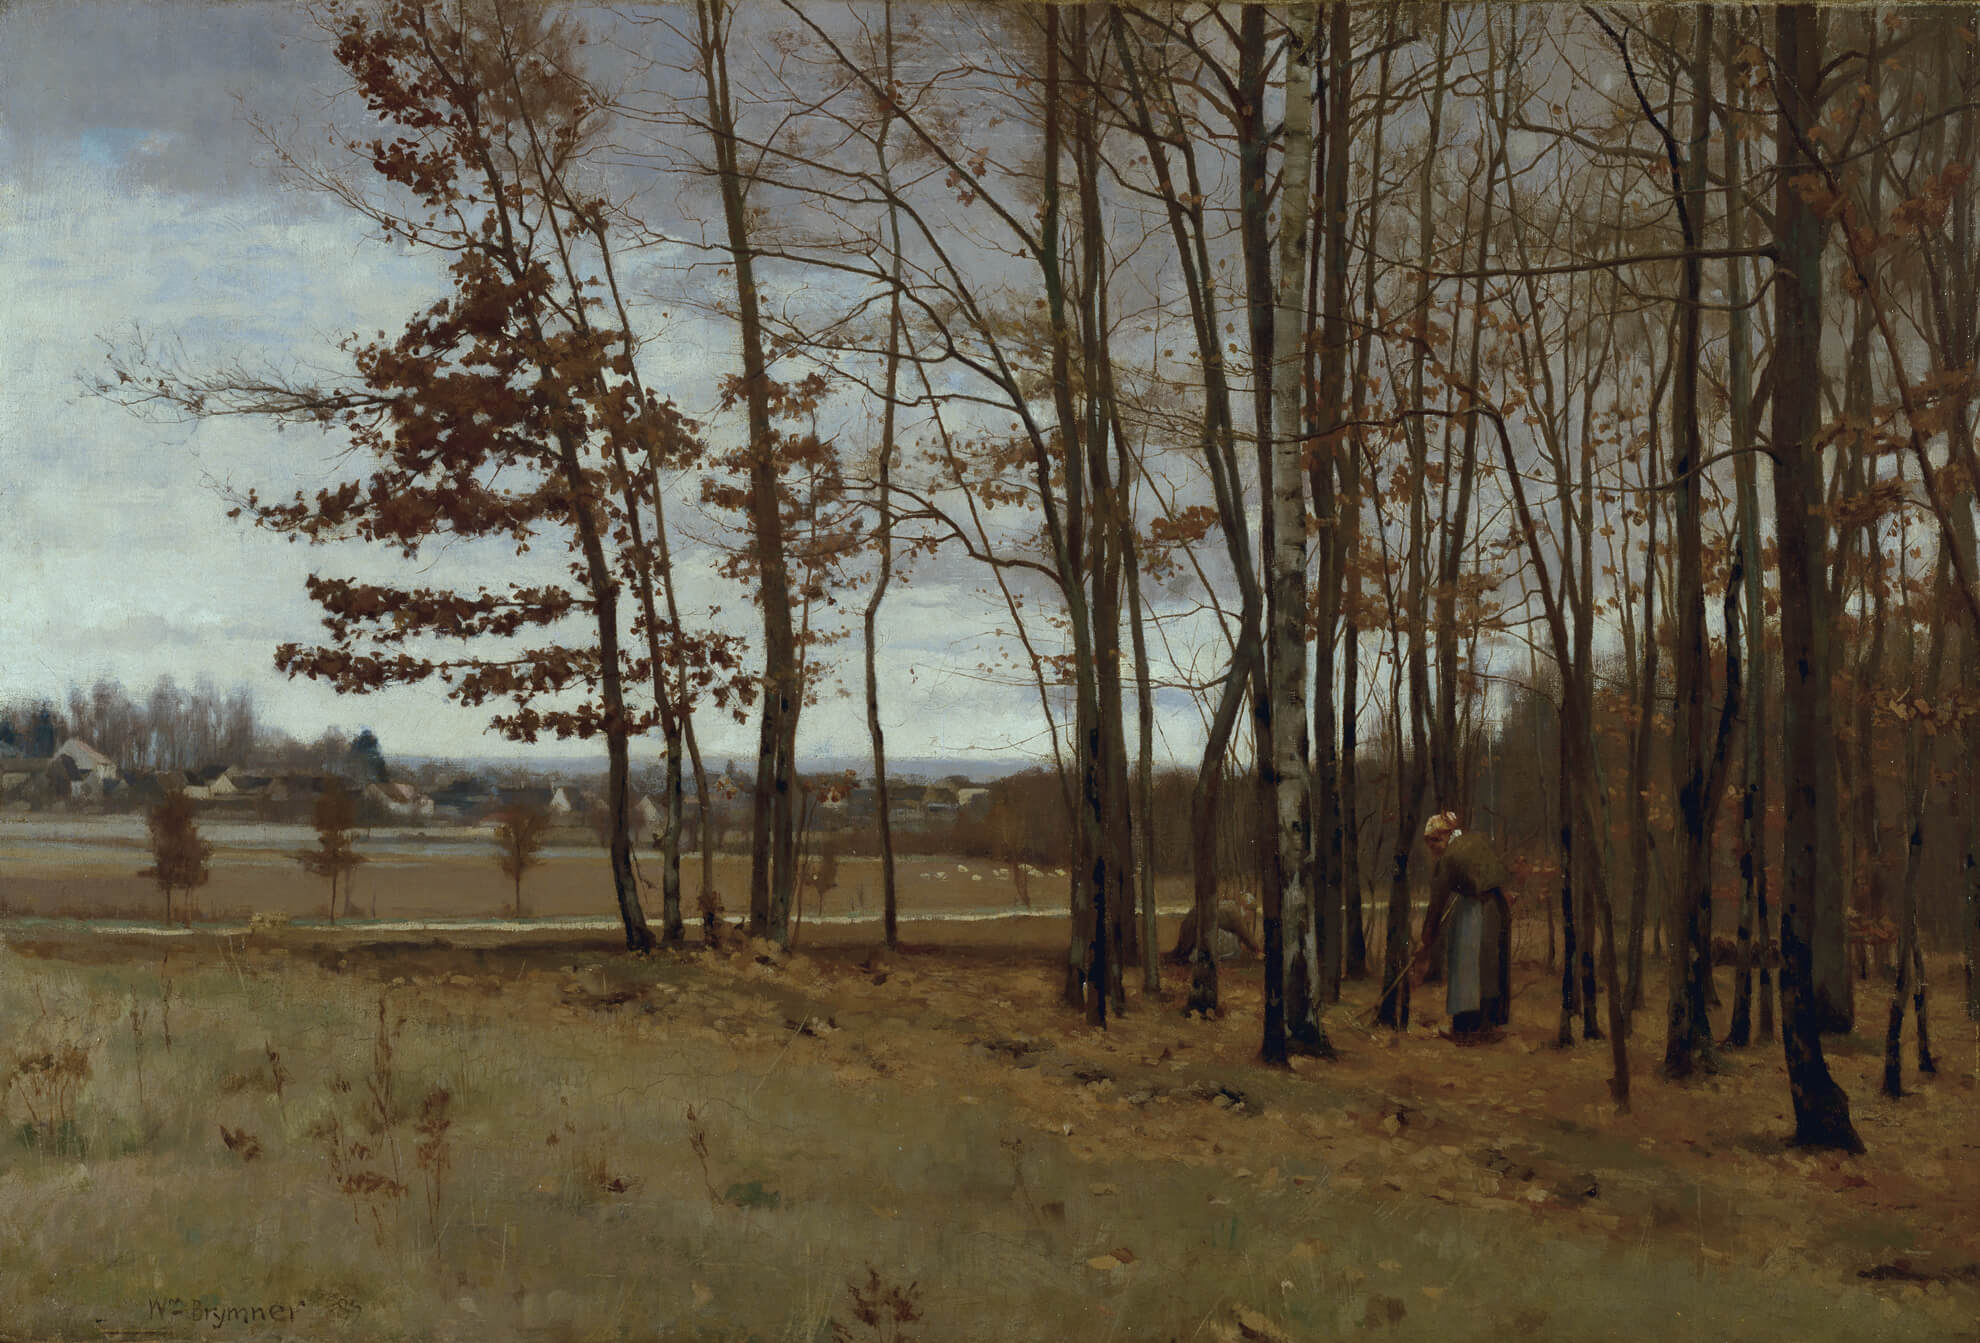 Border of the Forest of Fontainebleau, 1885